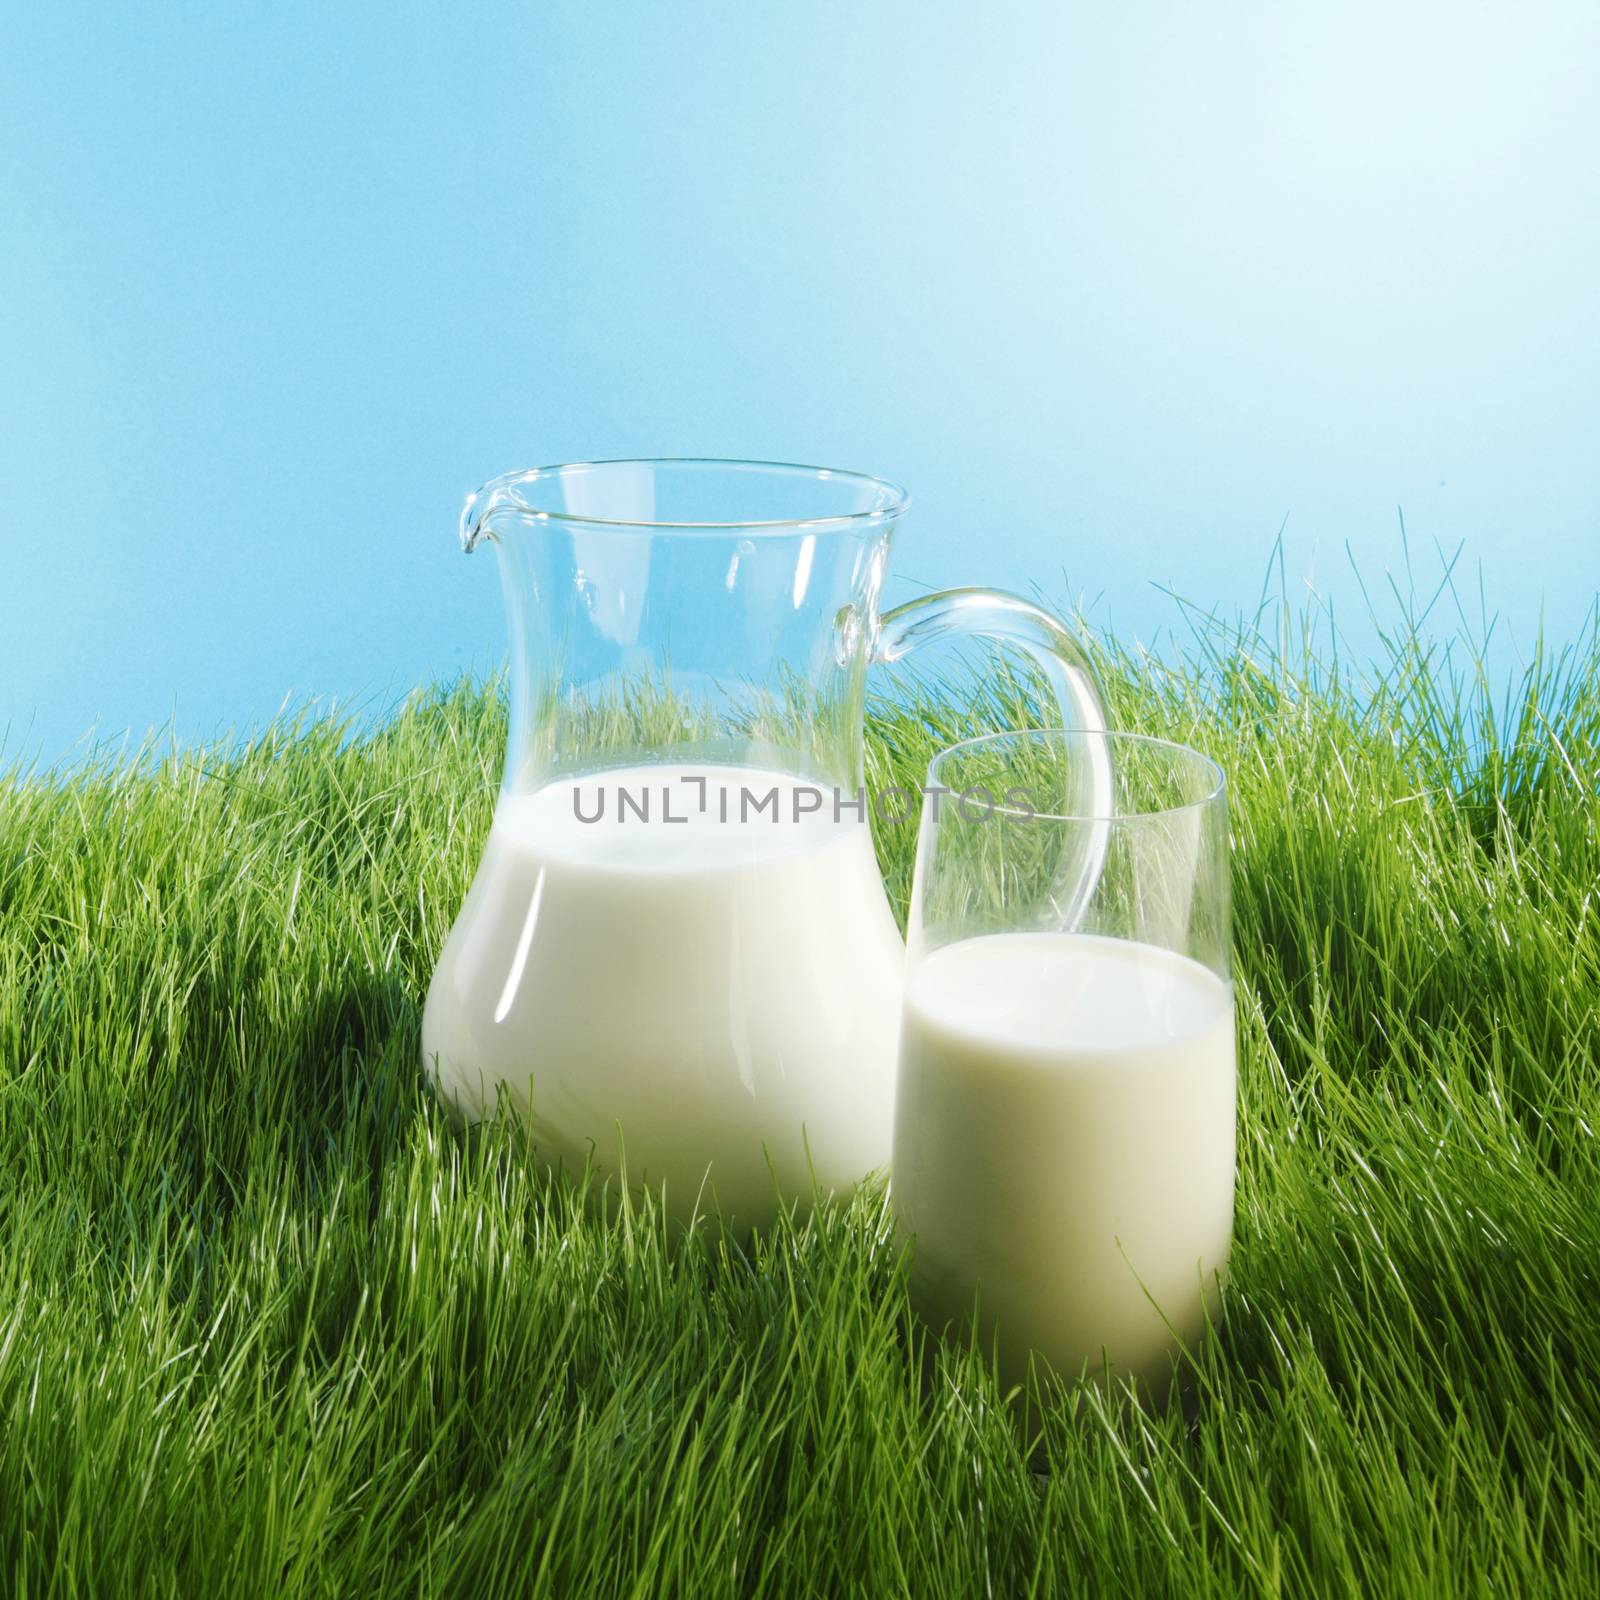 Milk jug and glass on grass field by Yellowj